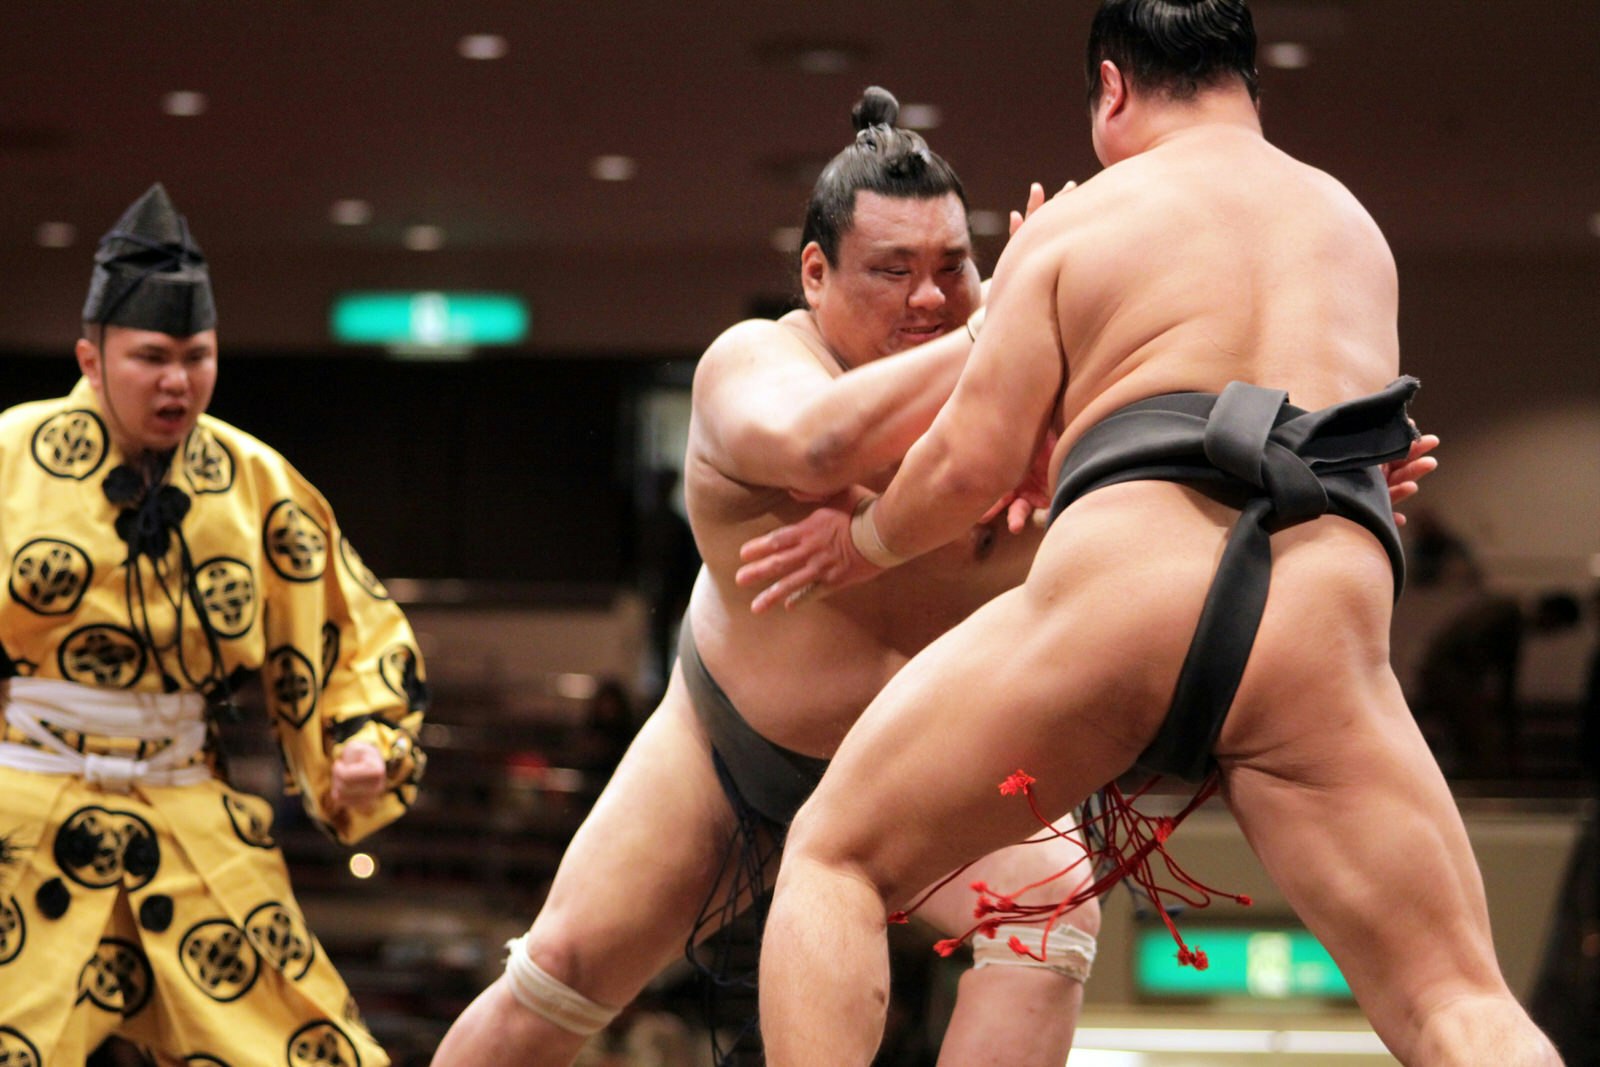 Two sumo wrestlers fight with each other in the ring as the umpire looks on